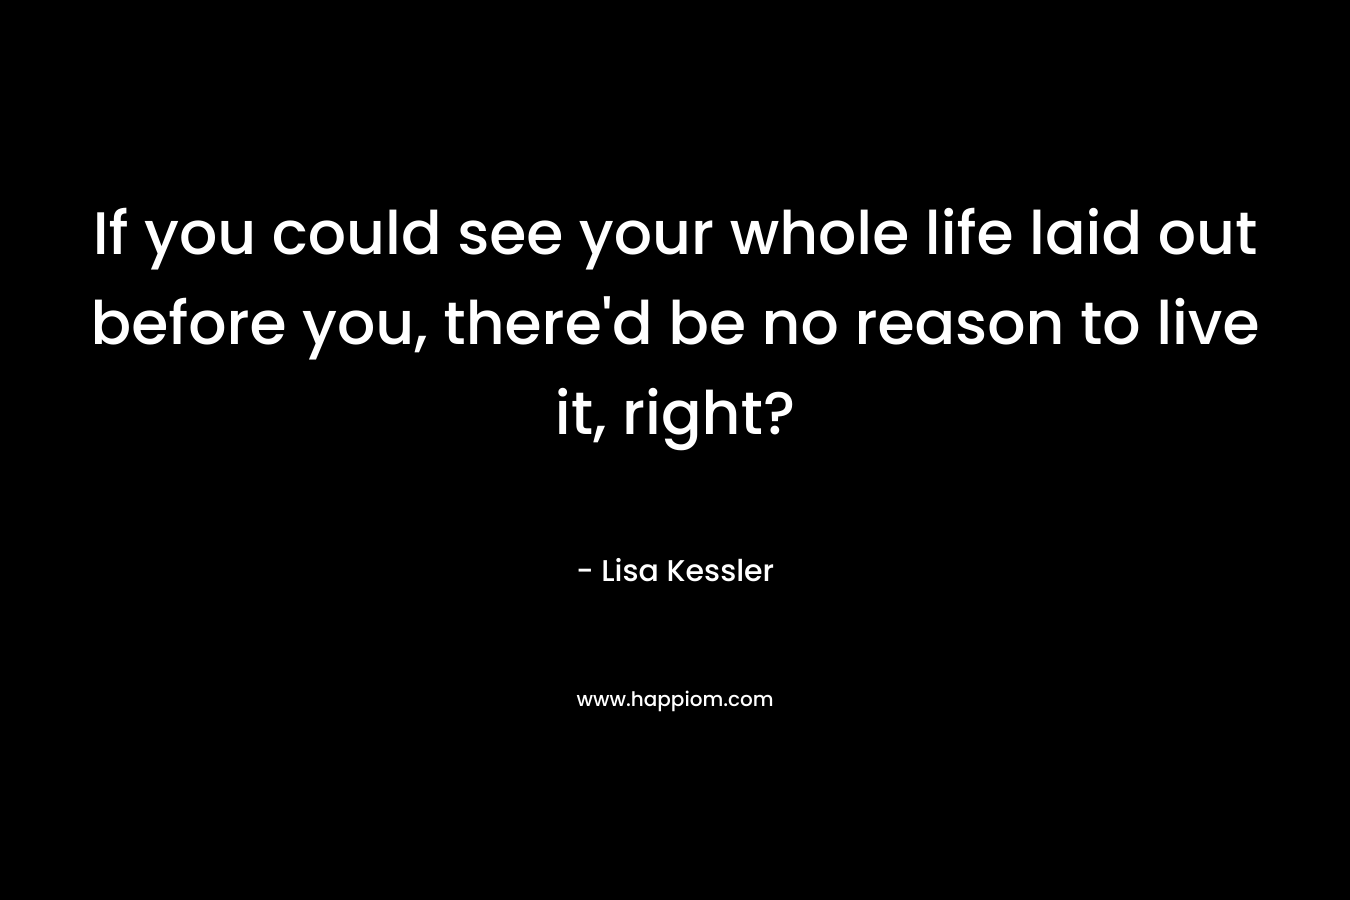 If you could see your whole life laid out before you, there’d be no reason to live it, right? – Lisa Kessler